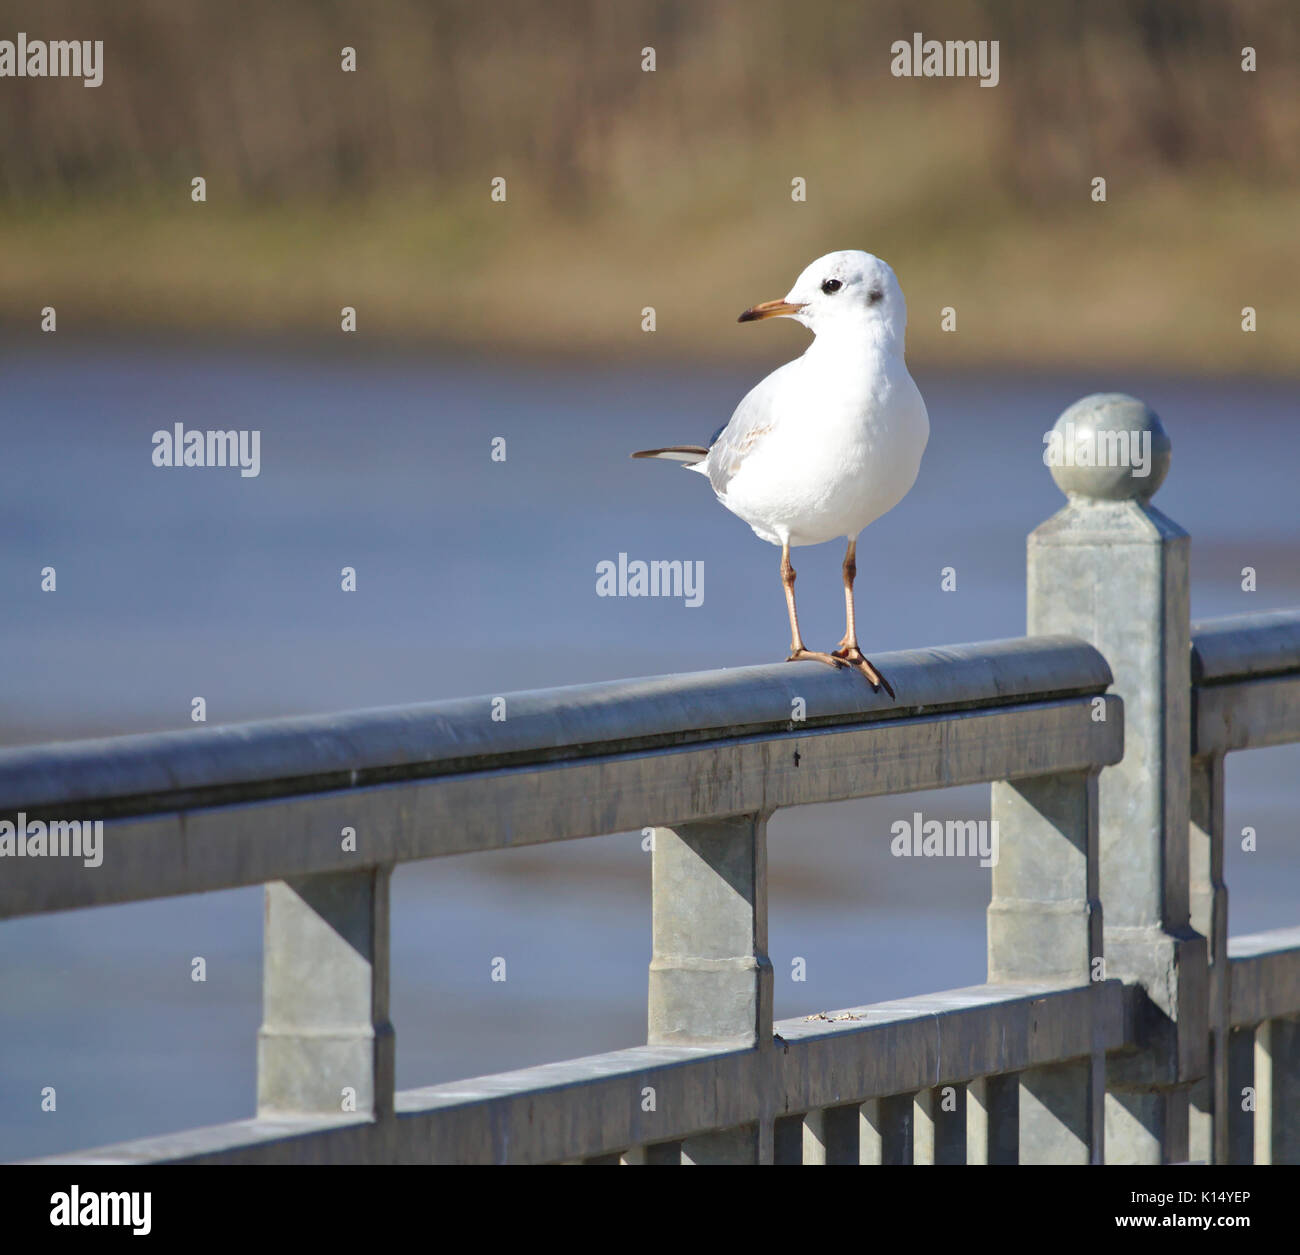 Black-headed gull in winter plumage perched on a metal rail Stock Photo